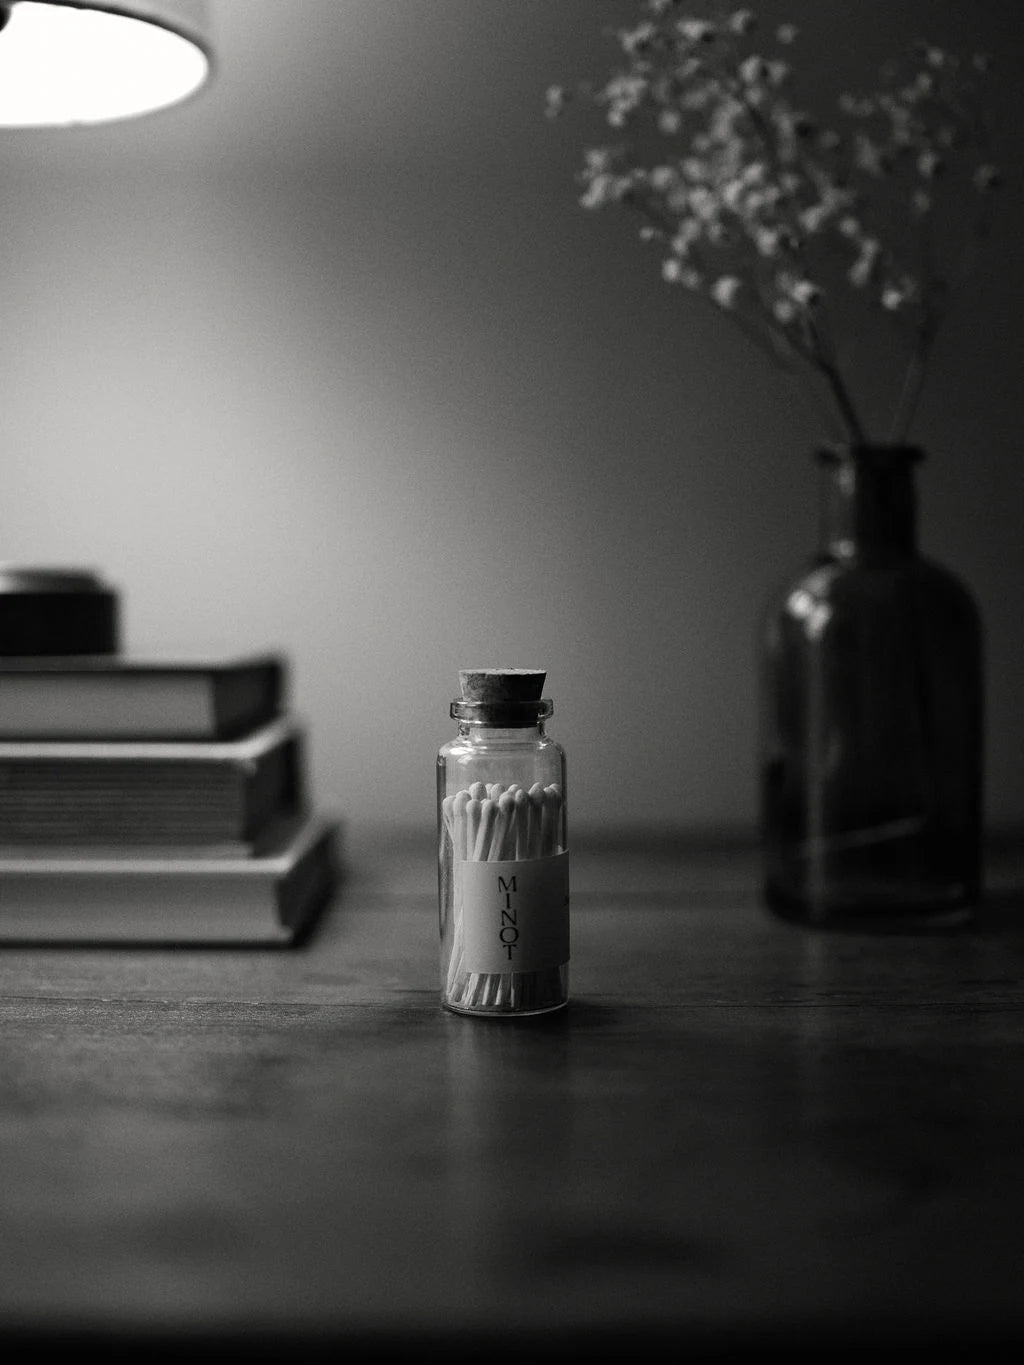 Grayscale MINOT matches in a small glass jar with a cork top sit next to books and dried flowers